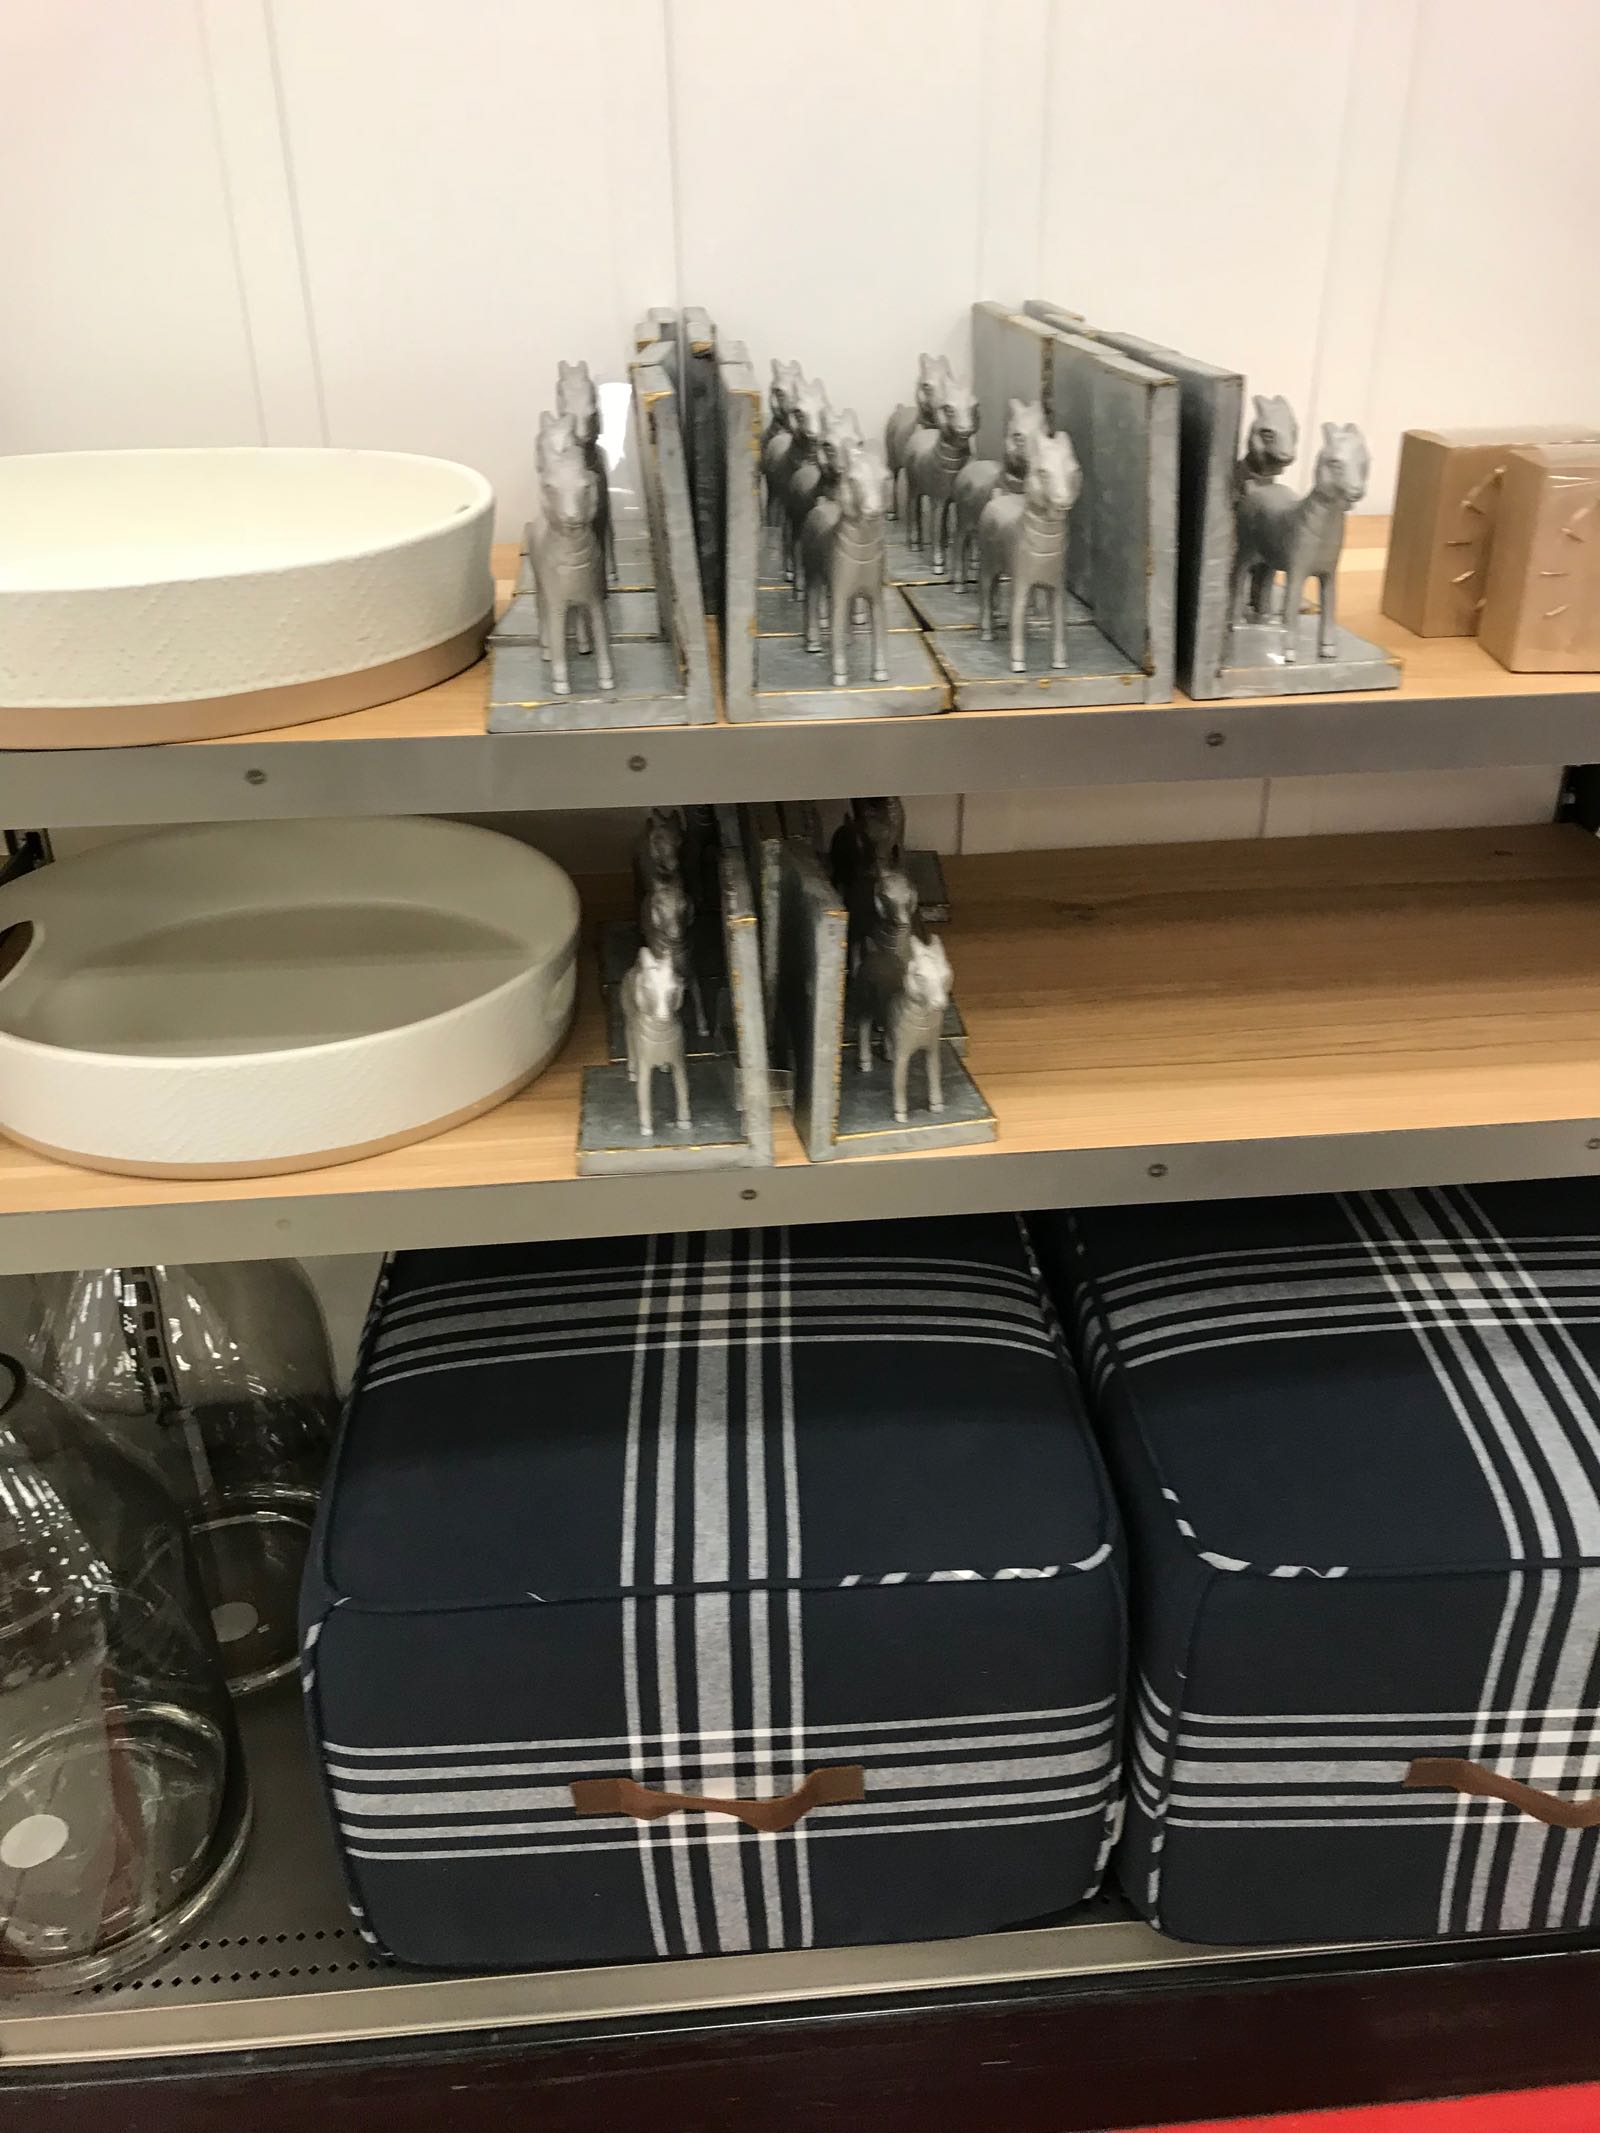 See in-store photos of Hearth and Hand by Magnolia at Target.